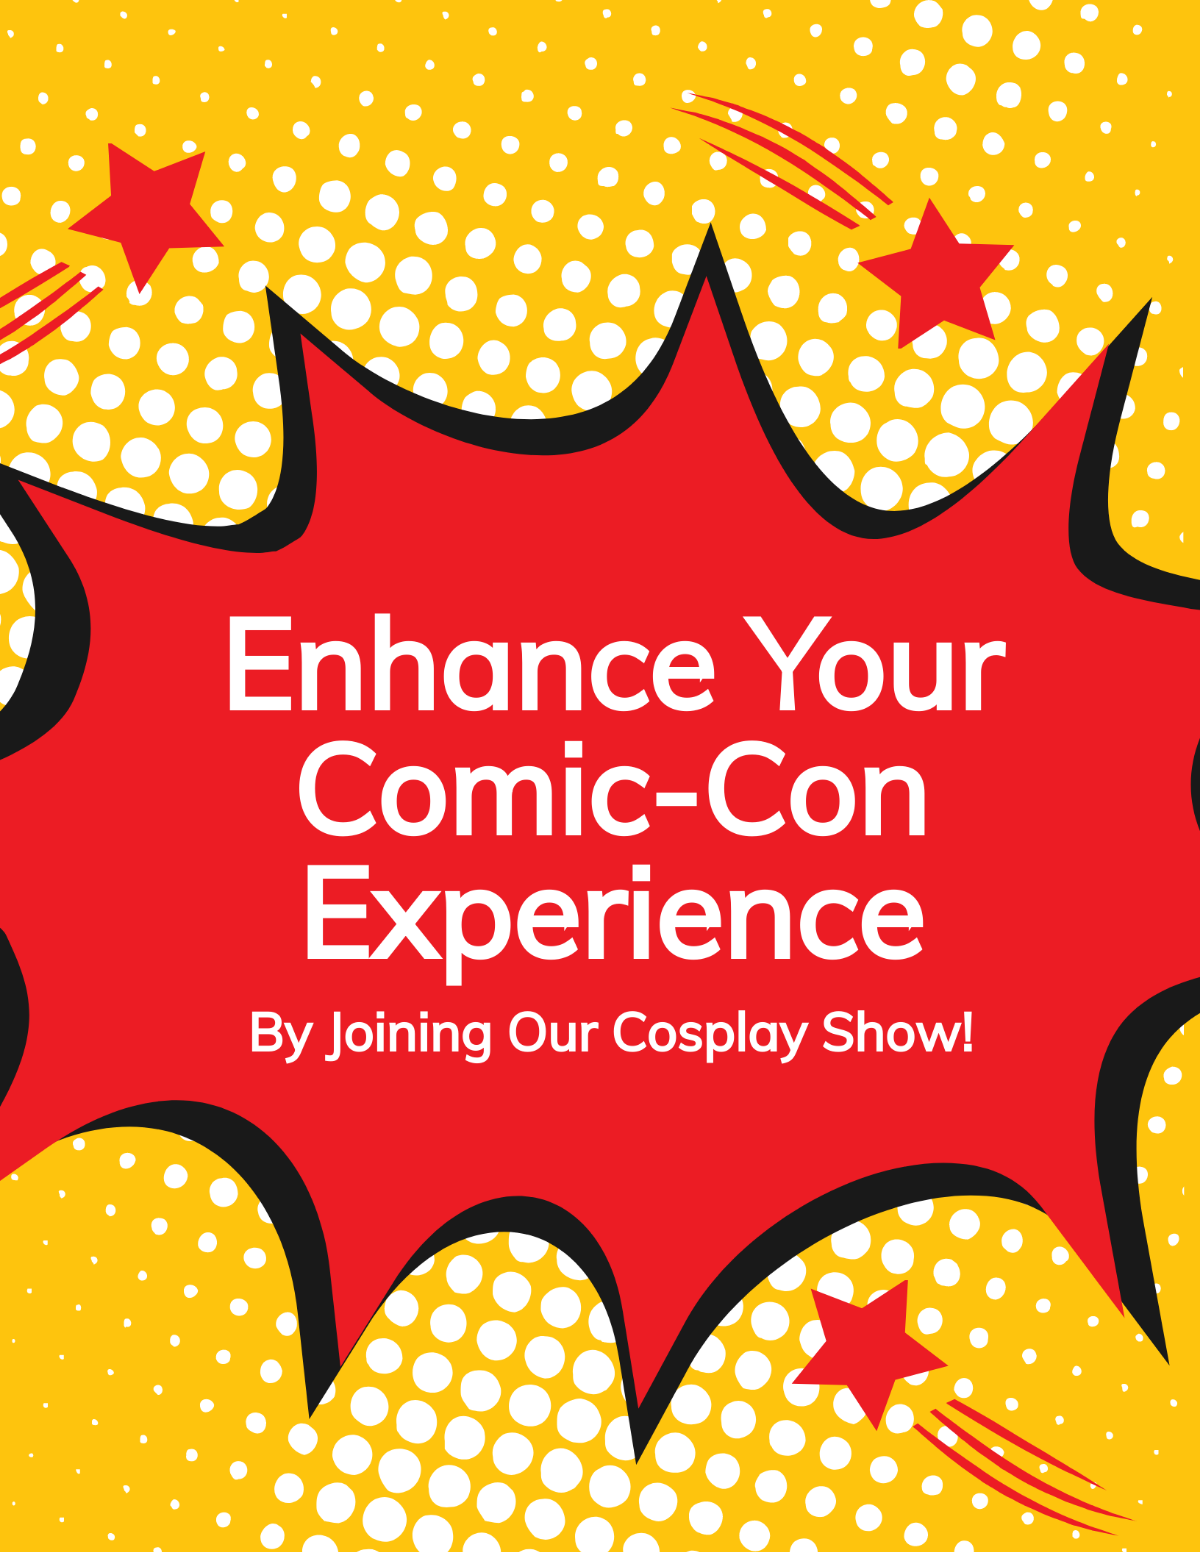 Comic Con Cosplay Show Flyer Template